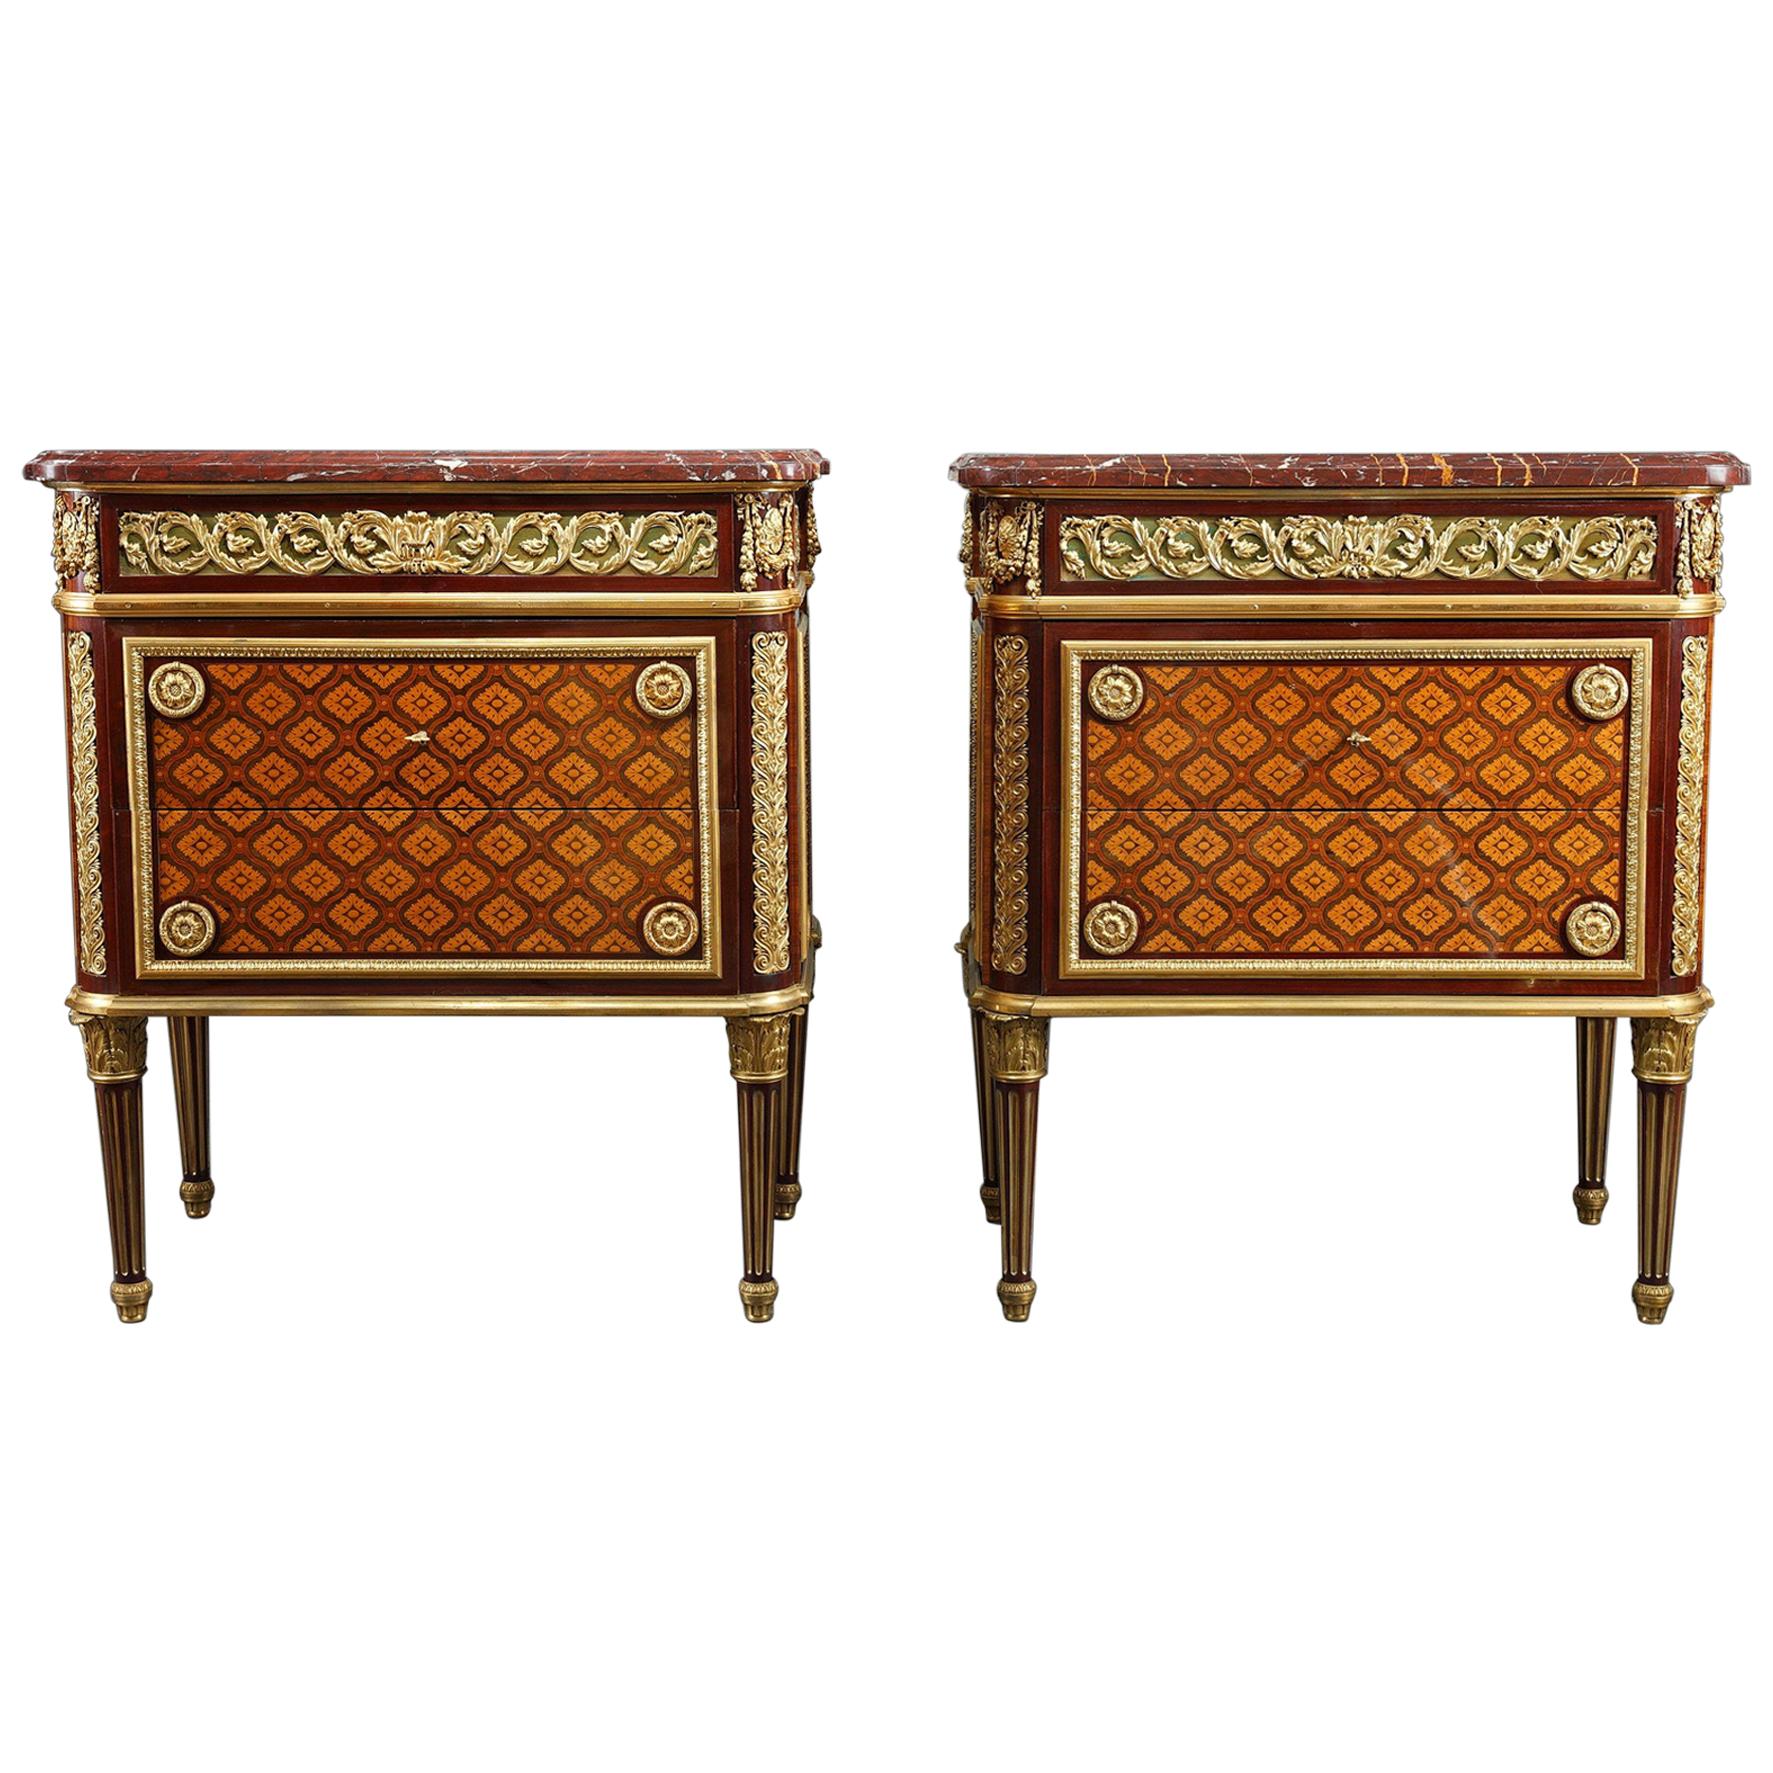 Pair of Louis XVI Style Commodes Attributed to Krieger, France, Circa 1880